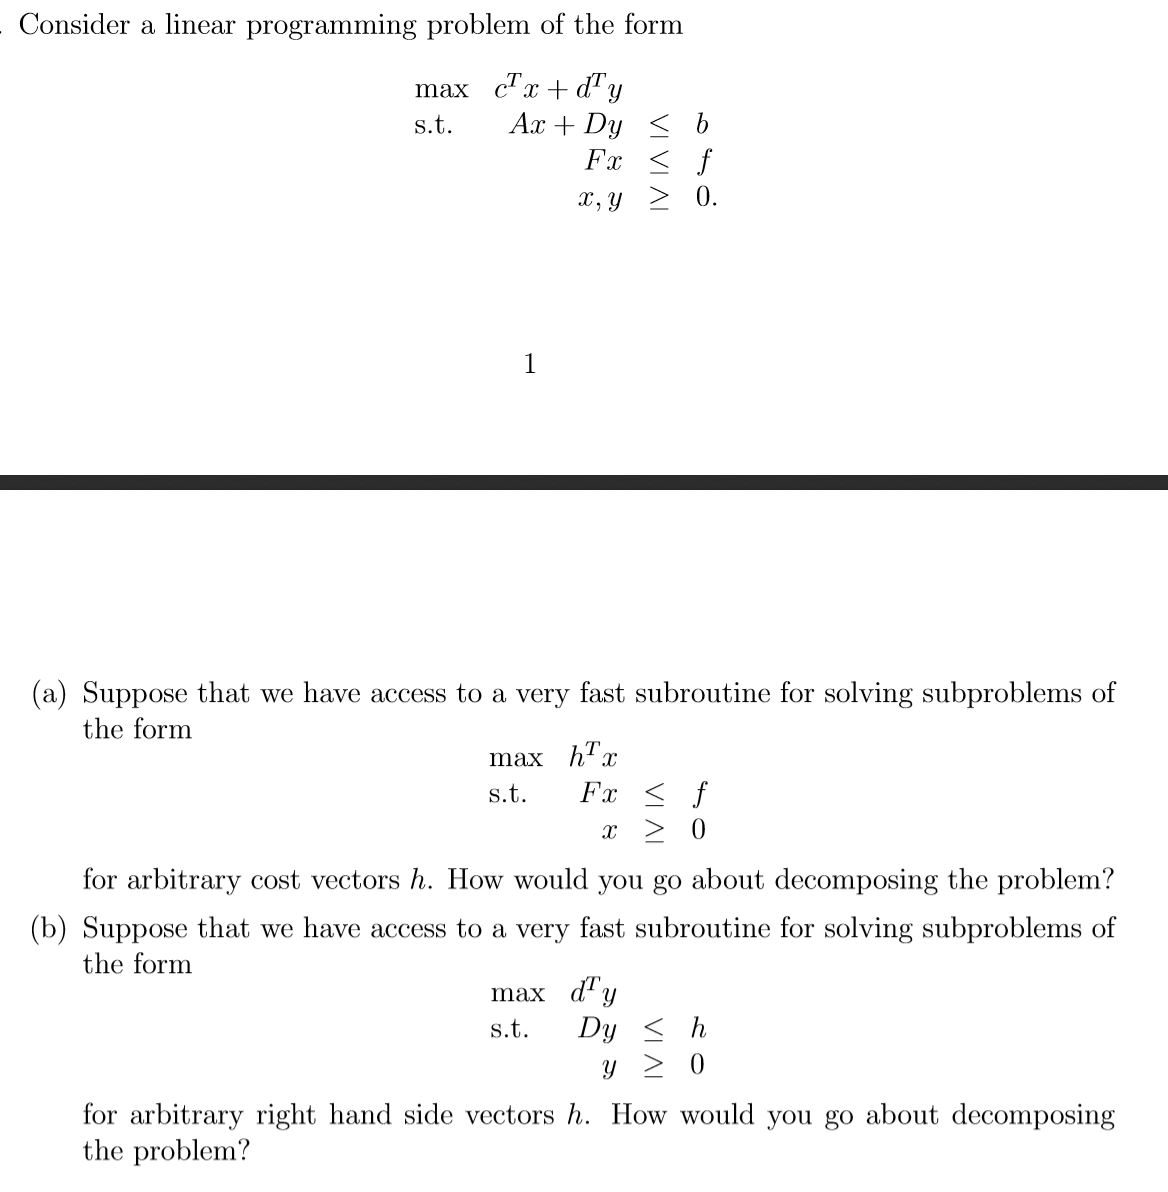 Consider a linear programming problem of the form